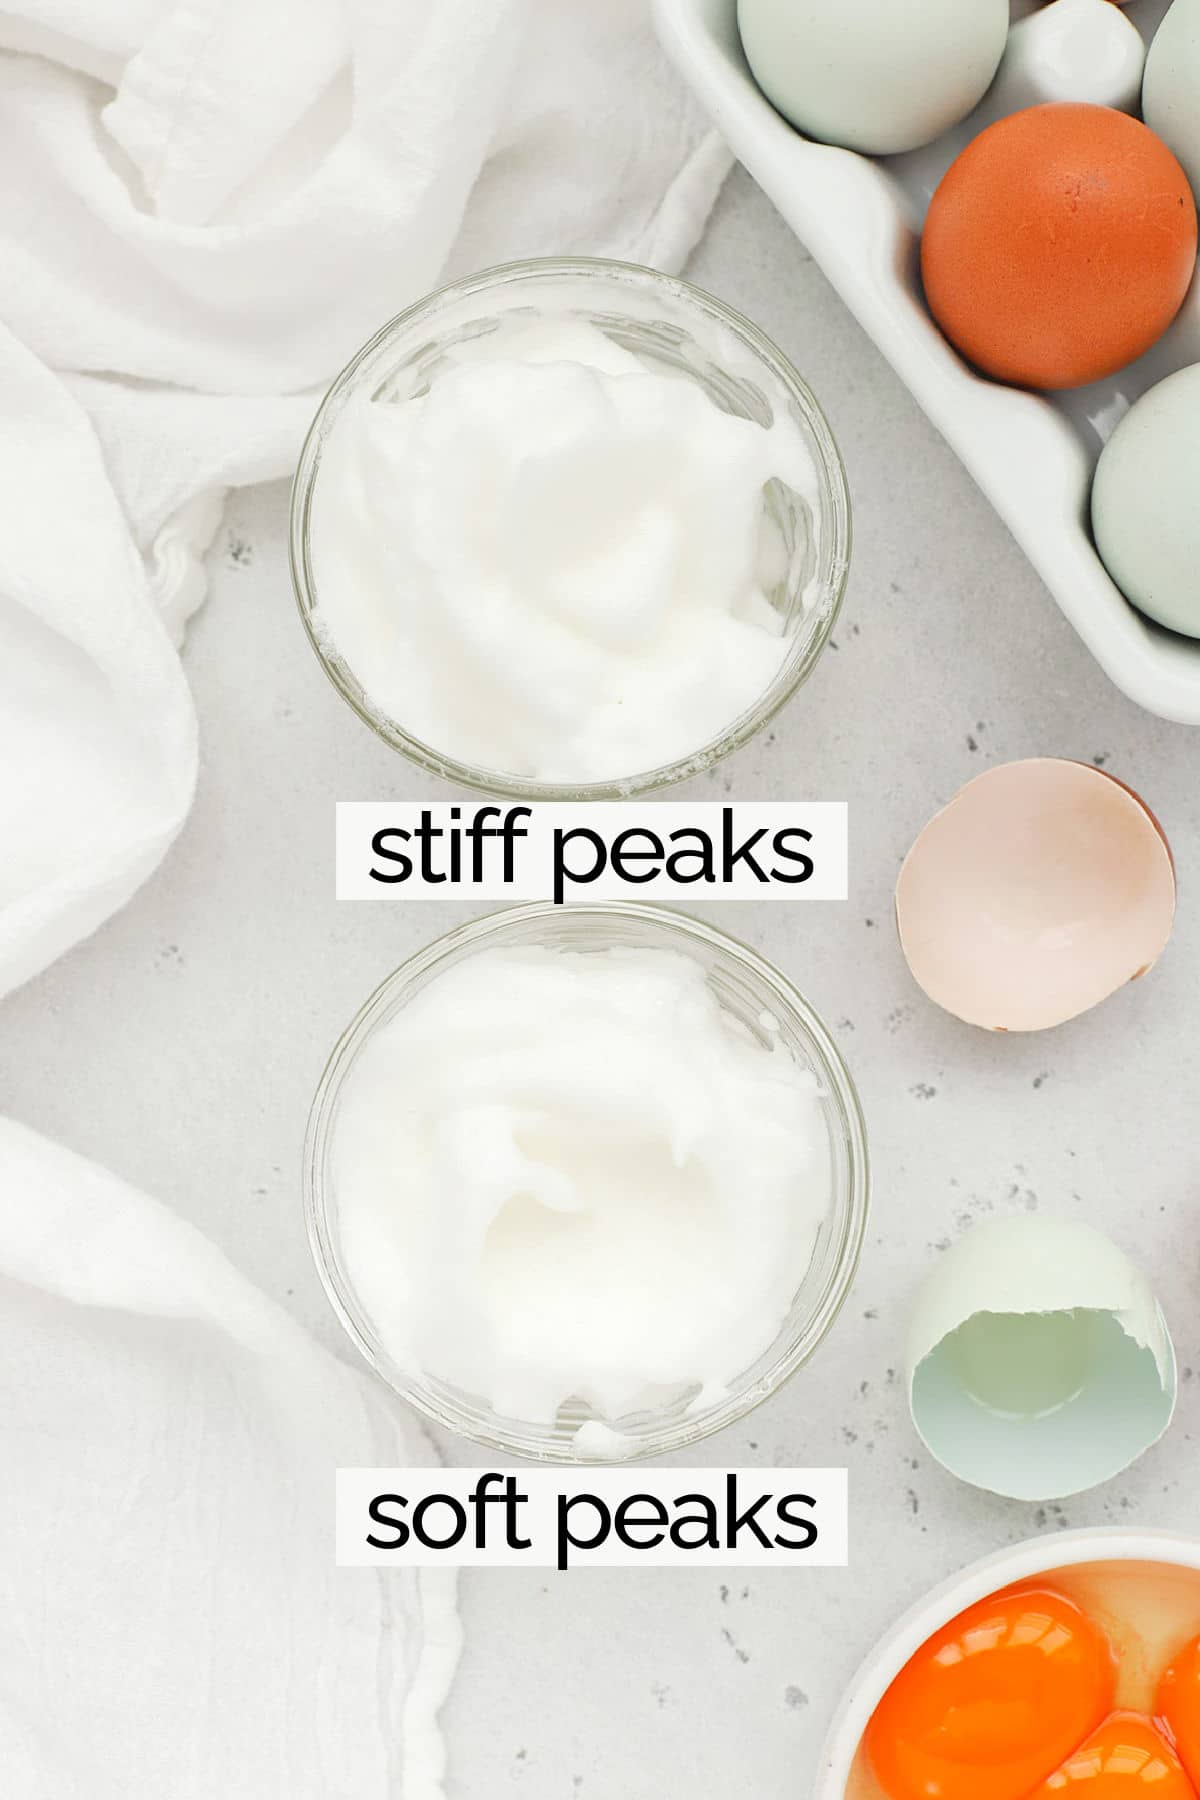 Overhead view of a bowl of egg whites whipped to soft peaks and a bowl of egg whites whipped to stiff peaks